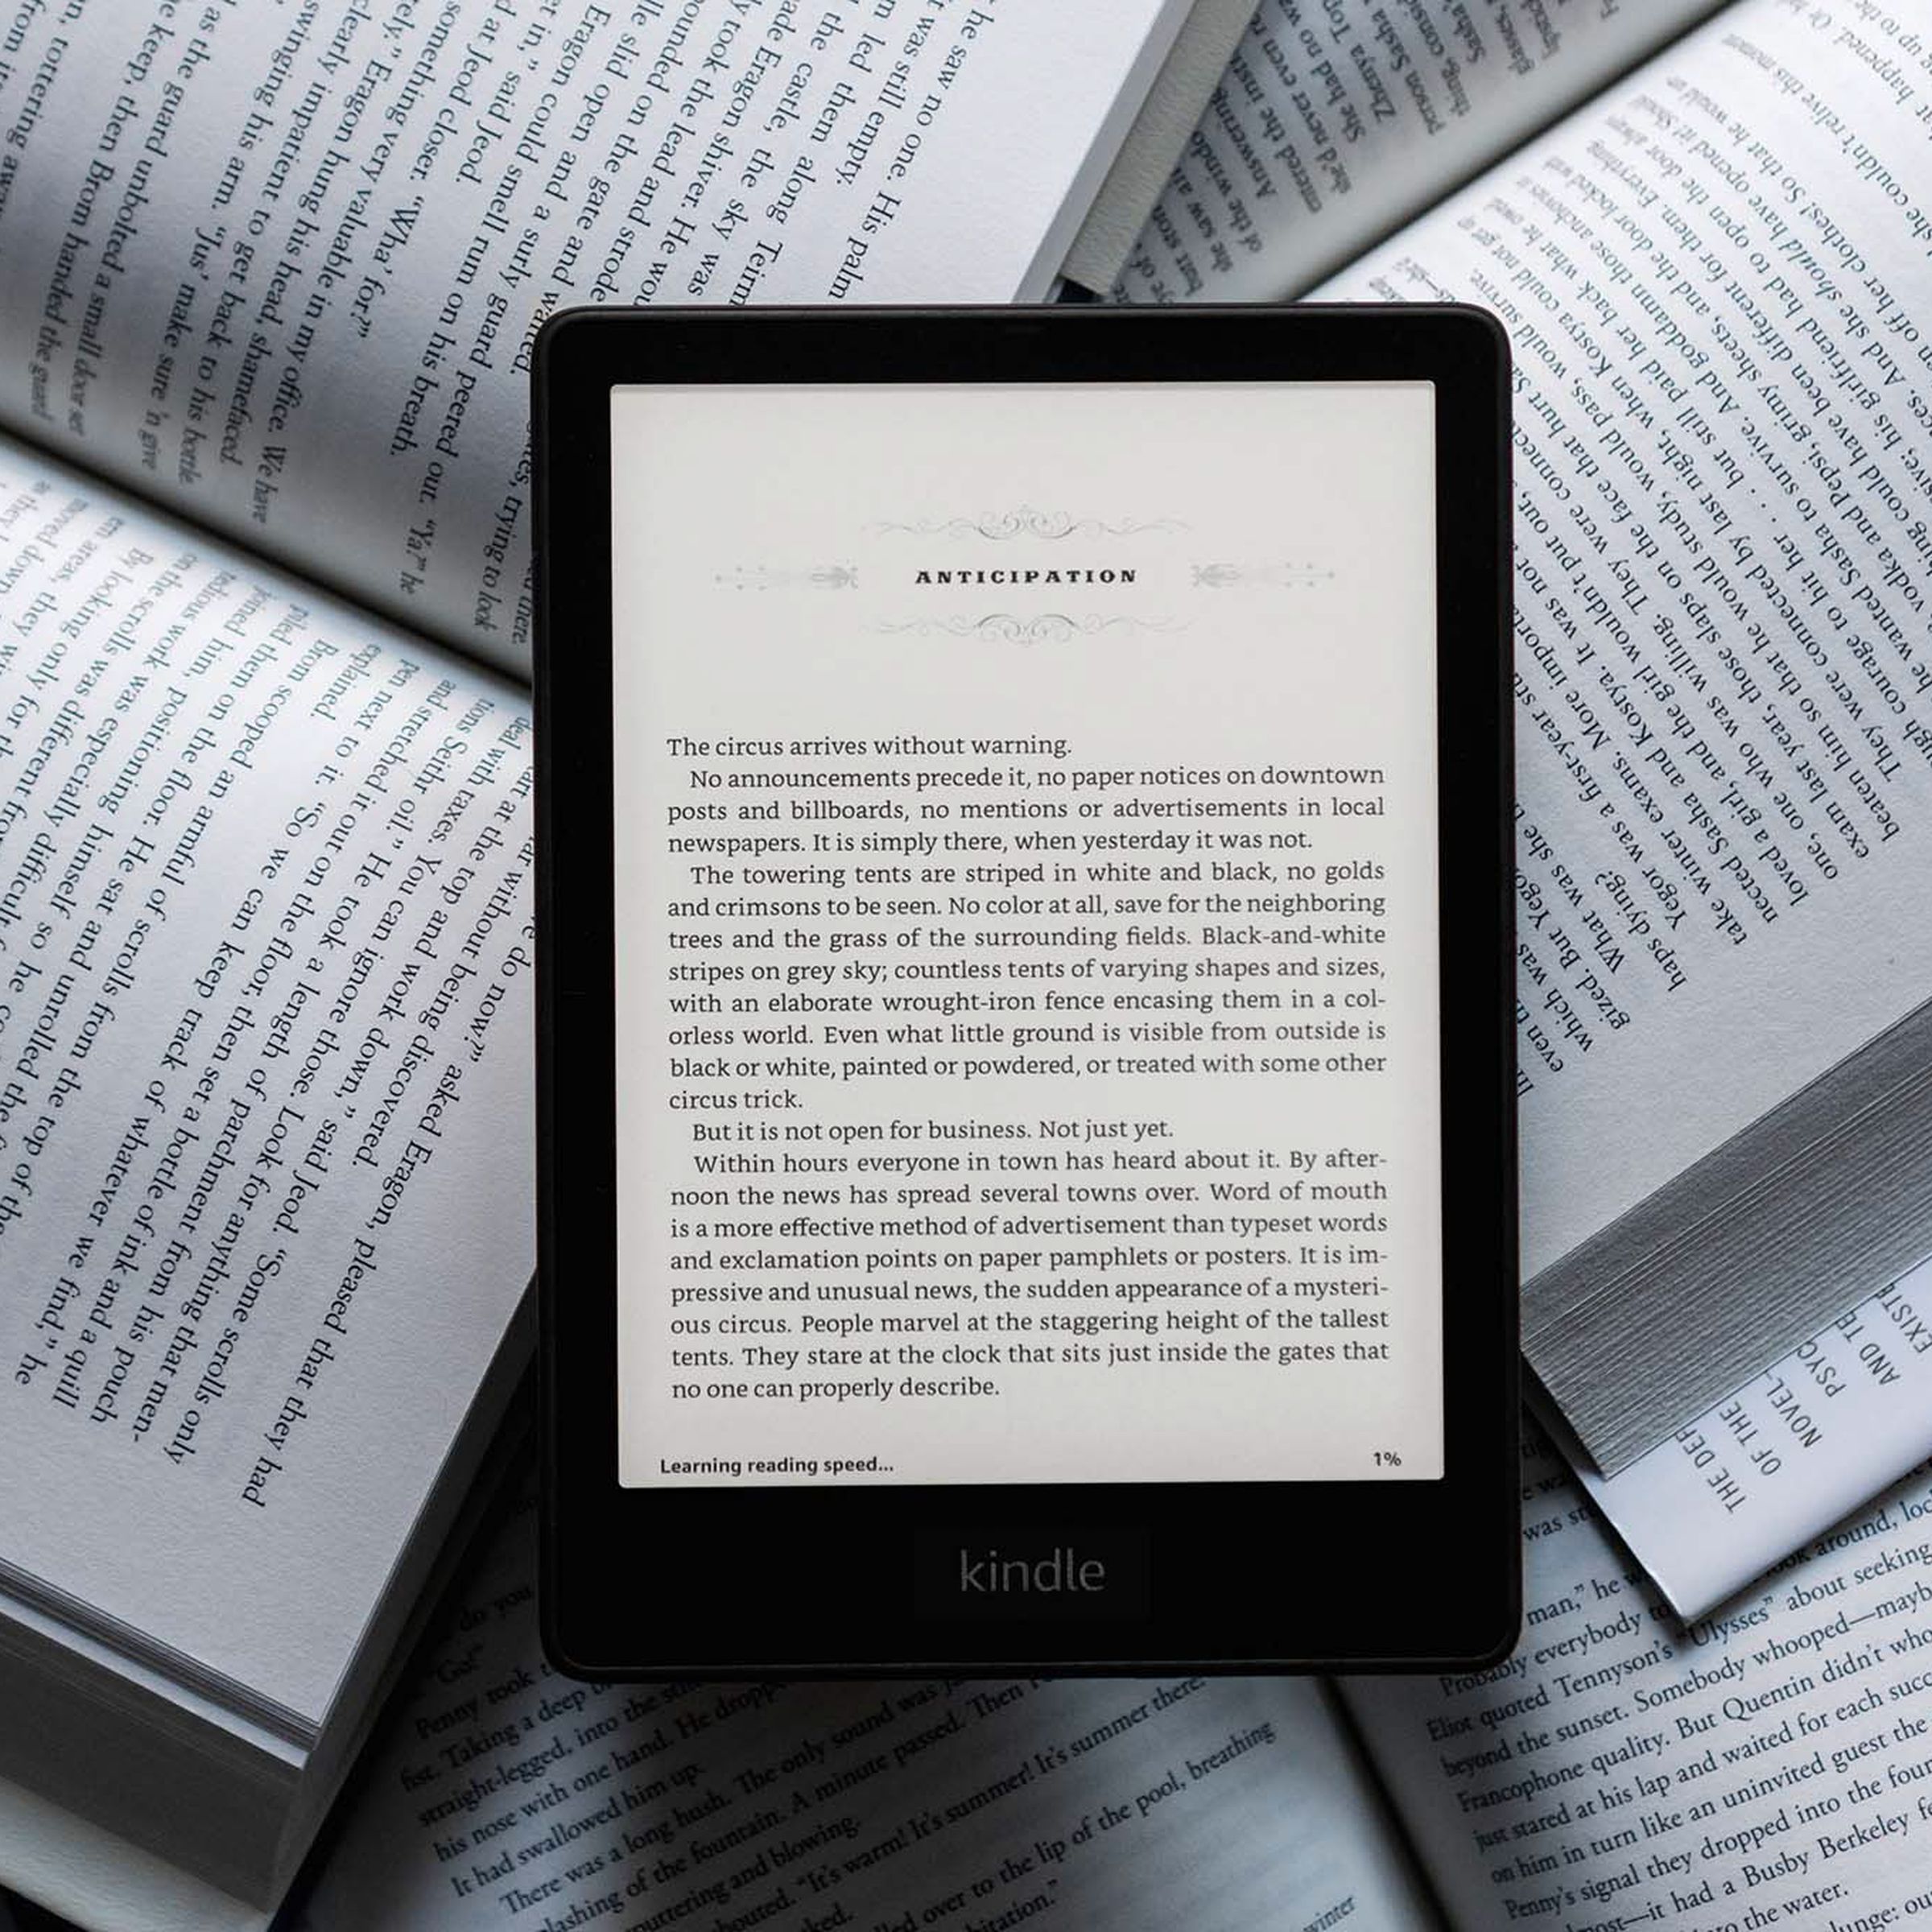 The Kindle Paperwhite against a backdrop of physical books.